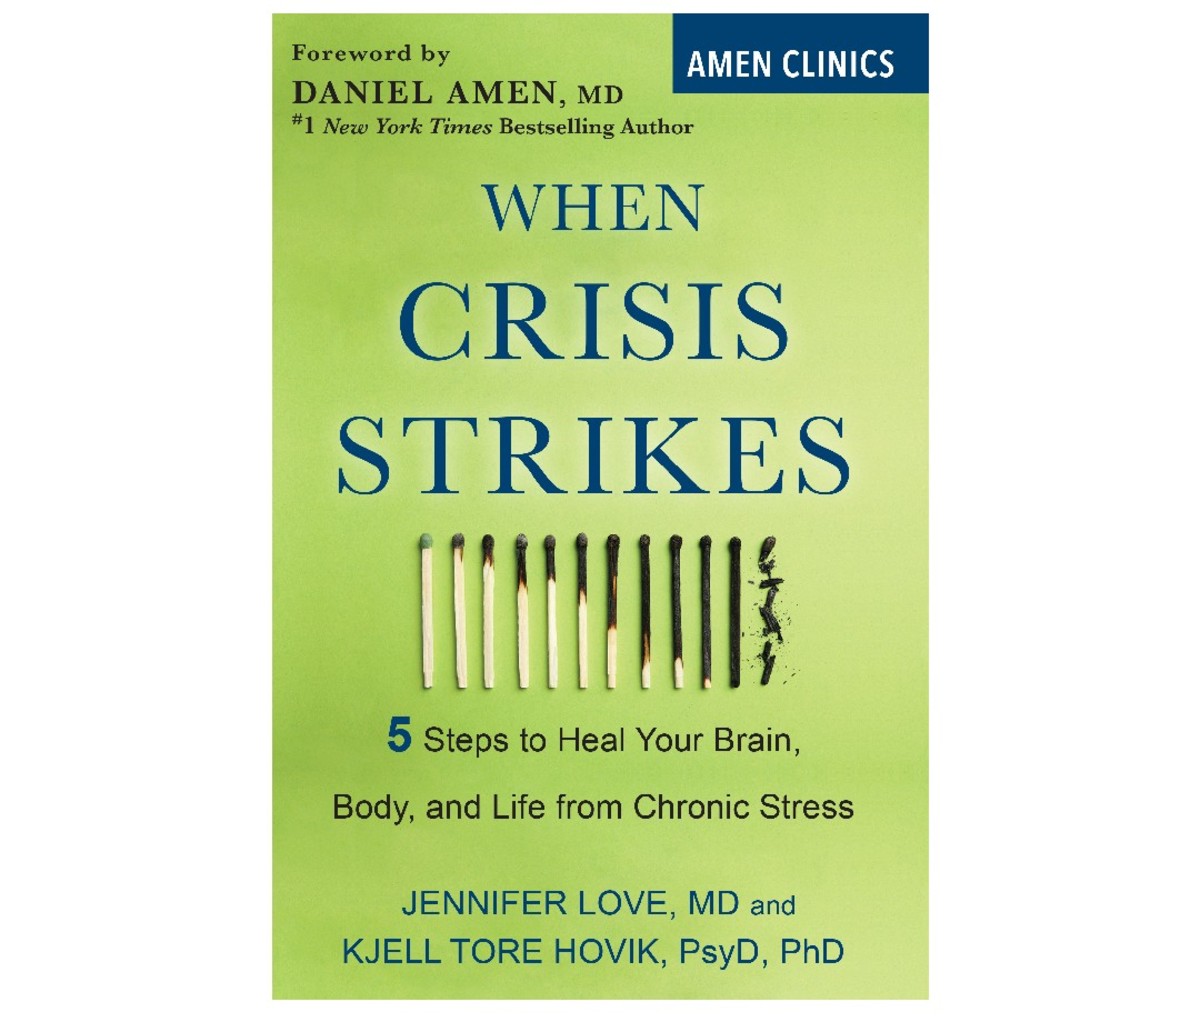 When Crisis Strikes: 5 Steps to Heal Your Brain, Body, and Life from Chronic Stress by  Jennifer Love, MD and Kjell Tove Hovik, PhD